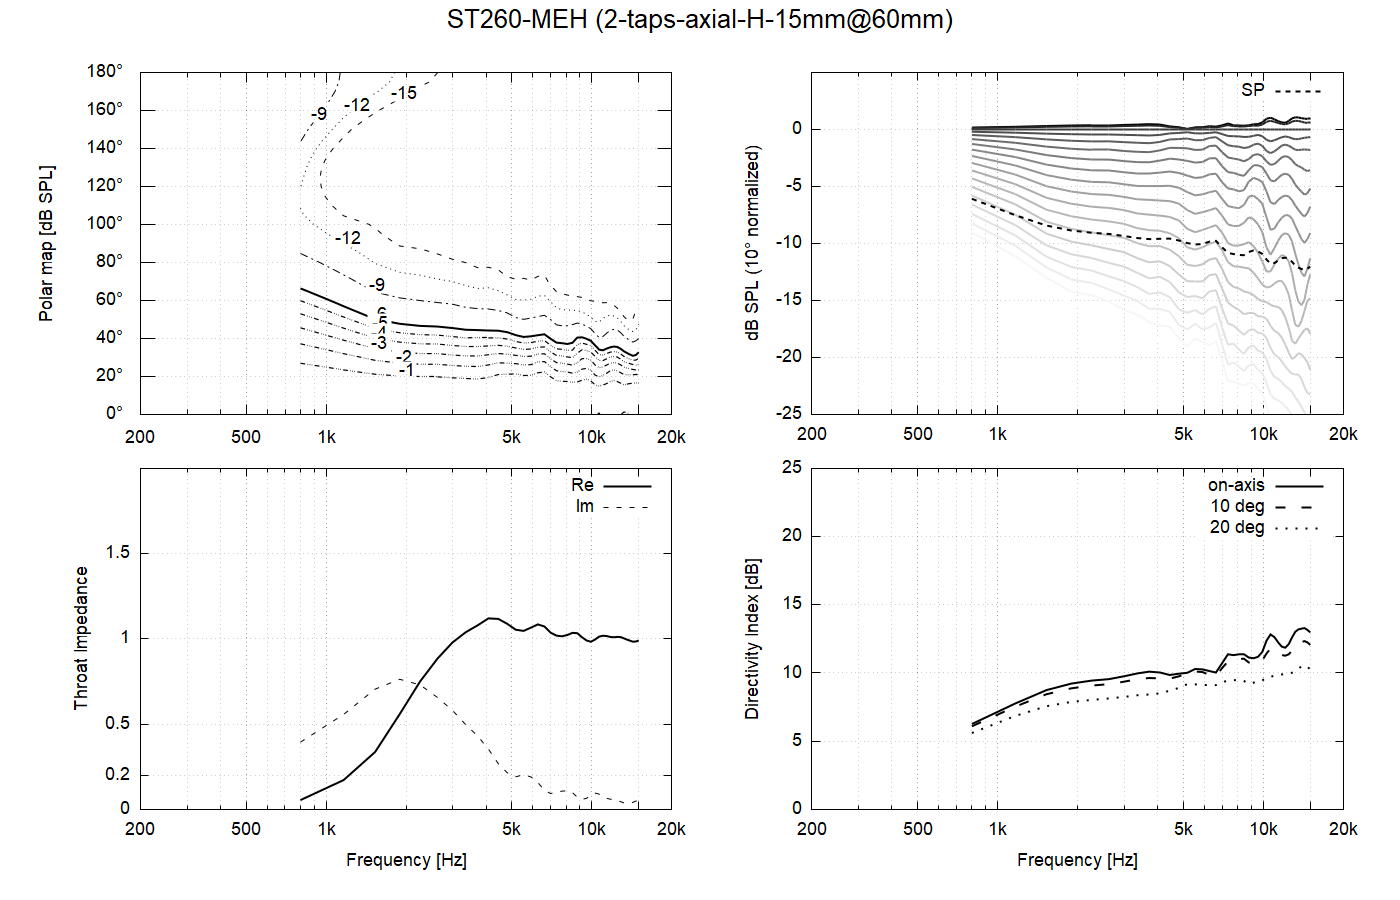 ST260MEH-2-taps-axial-H-15mm@60mm.png